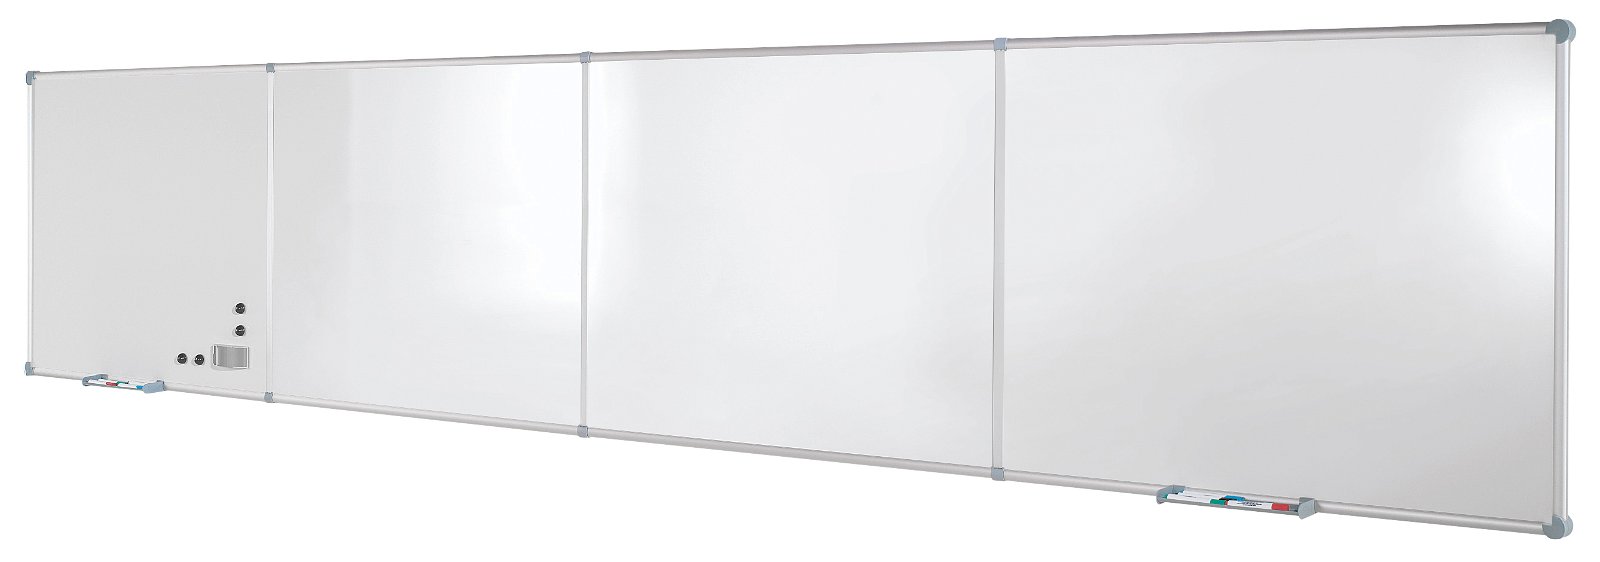 Endlos-Whiteboards MAULpro, Emaille - 90 x 120 cm - Anfang- und Endmodul